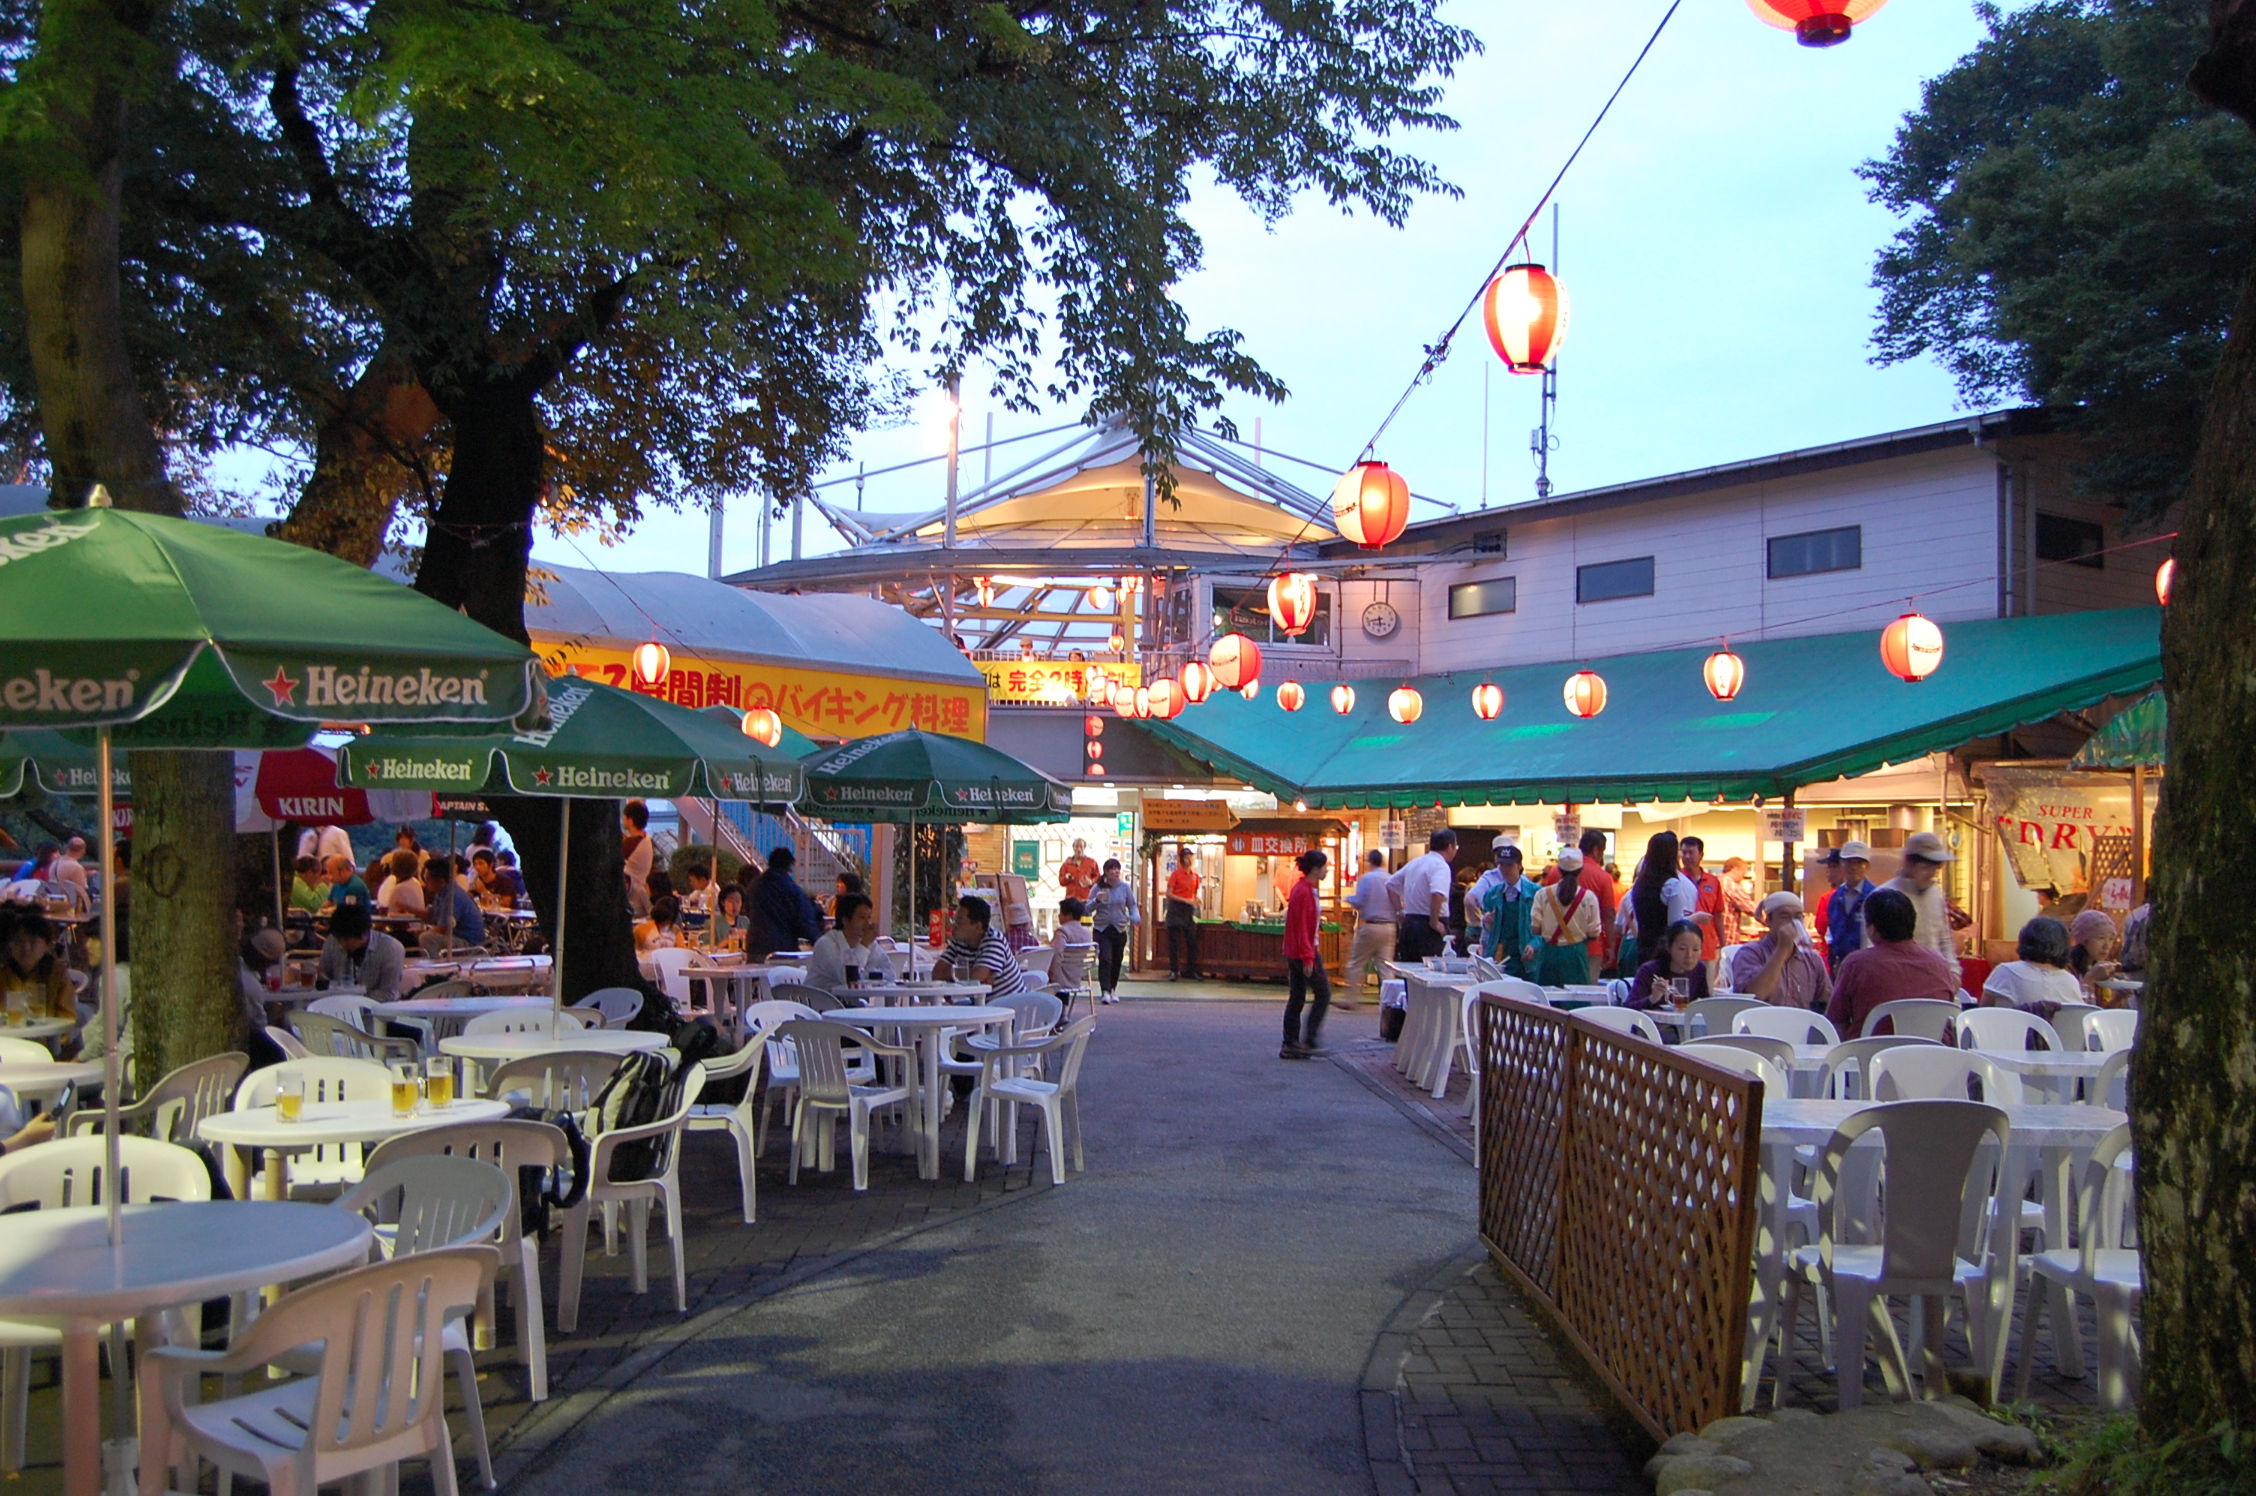 an outdoor market that sells food at night